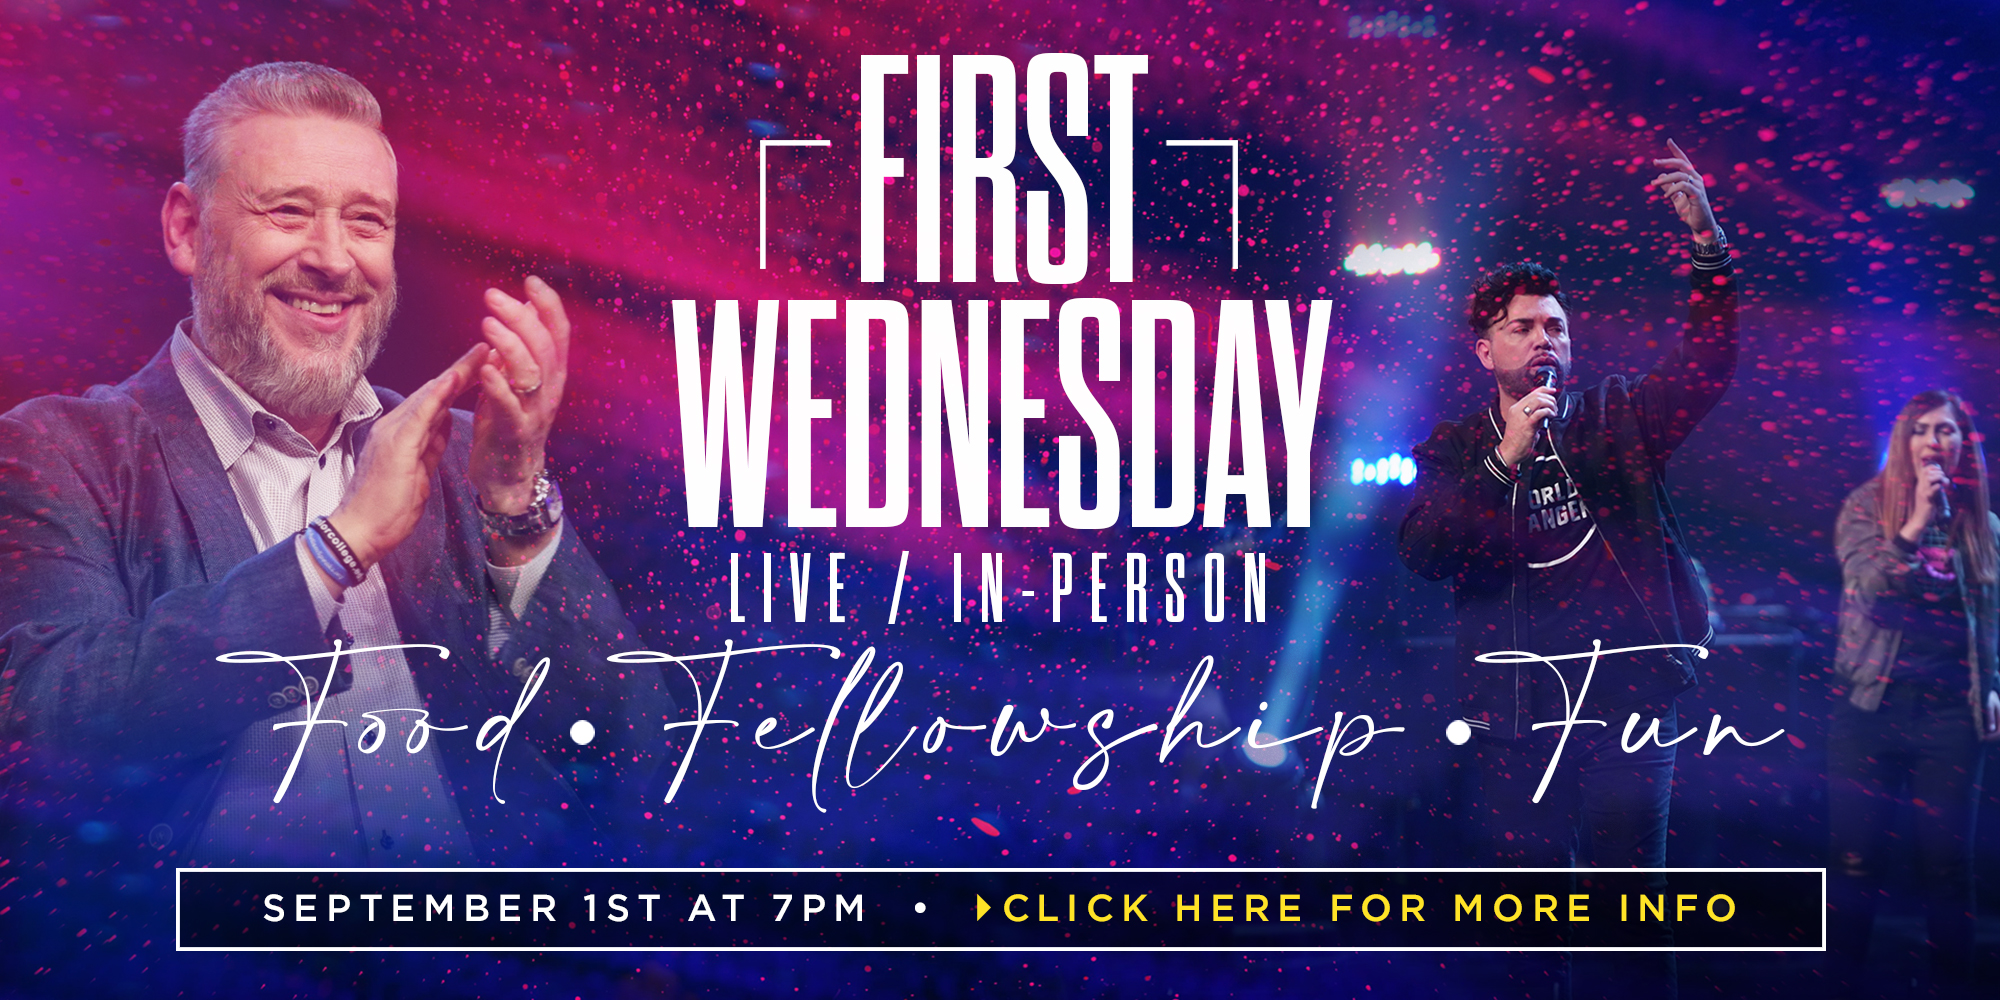 First Wednesday Live/In-Person Food - Fellowship - Fun